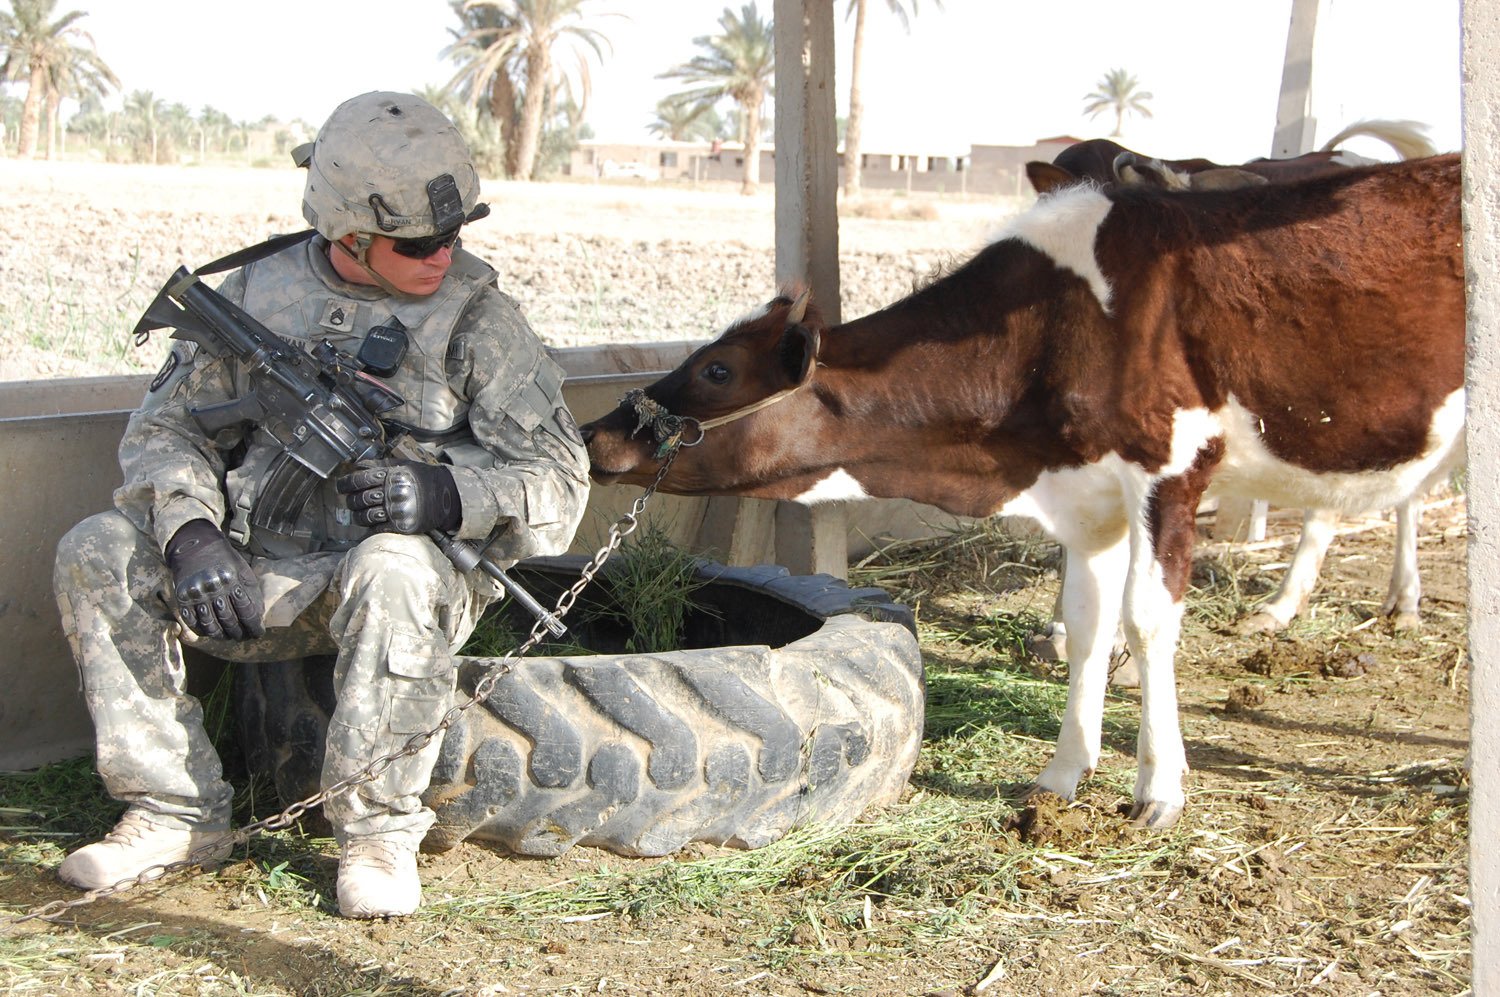 Staff Sgt. Chad Ryan, a Sterling, Ill., native, is greeted by a cow while taking a break during a patrol, May 12 in the East Anbar province, northwest of Baghdad. Ryan is a mortar section sergeant assigned to Headquarters and Headquarters Company, 1st Battalion, 27th Infantry Regiment “Wolfhounds,” 2nd Stryker Brigade Combat Team “Warrior,” 25th Infantry Division, Multi-National Division – Baghdad. (U.S. Army photo/Staff Sgt. J.B. Jaso III)